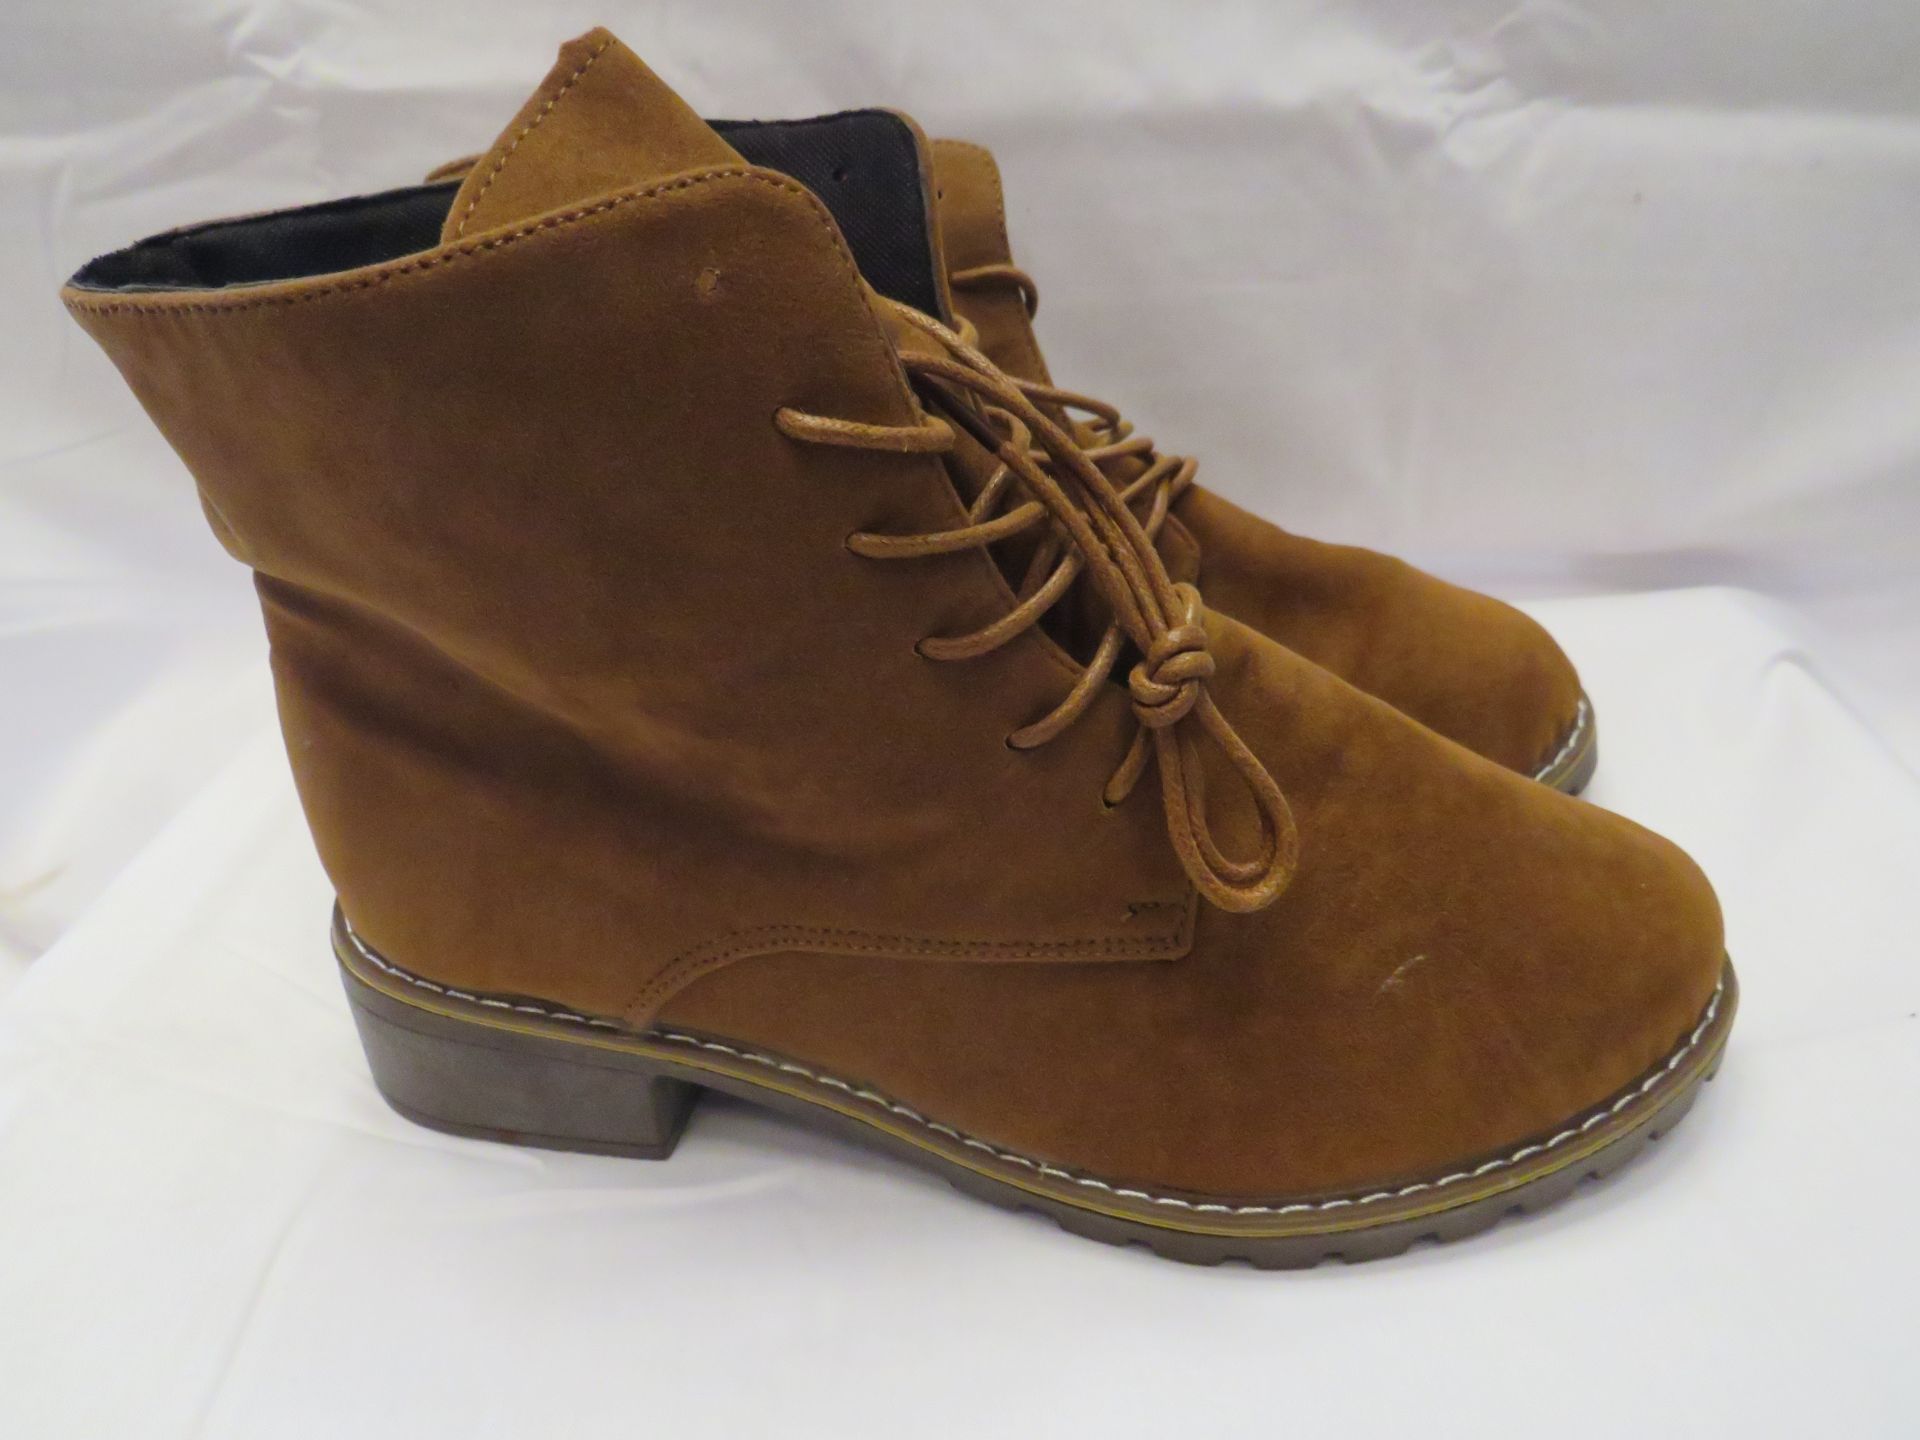 Ladies Flat Suede Ankle Boot Tan Size 39 New